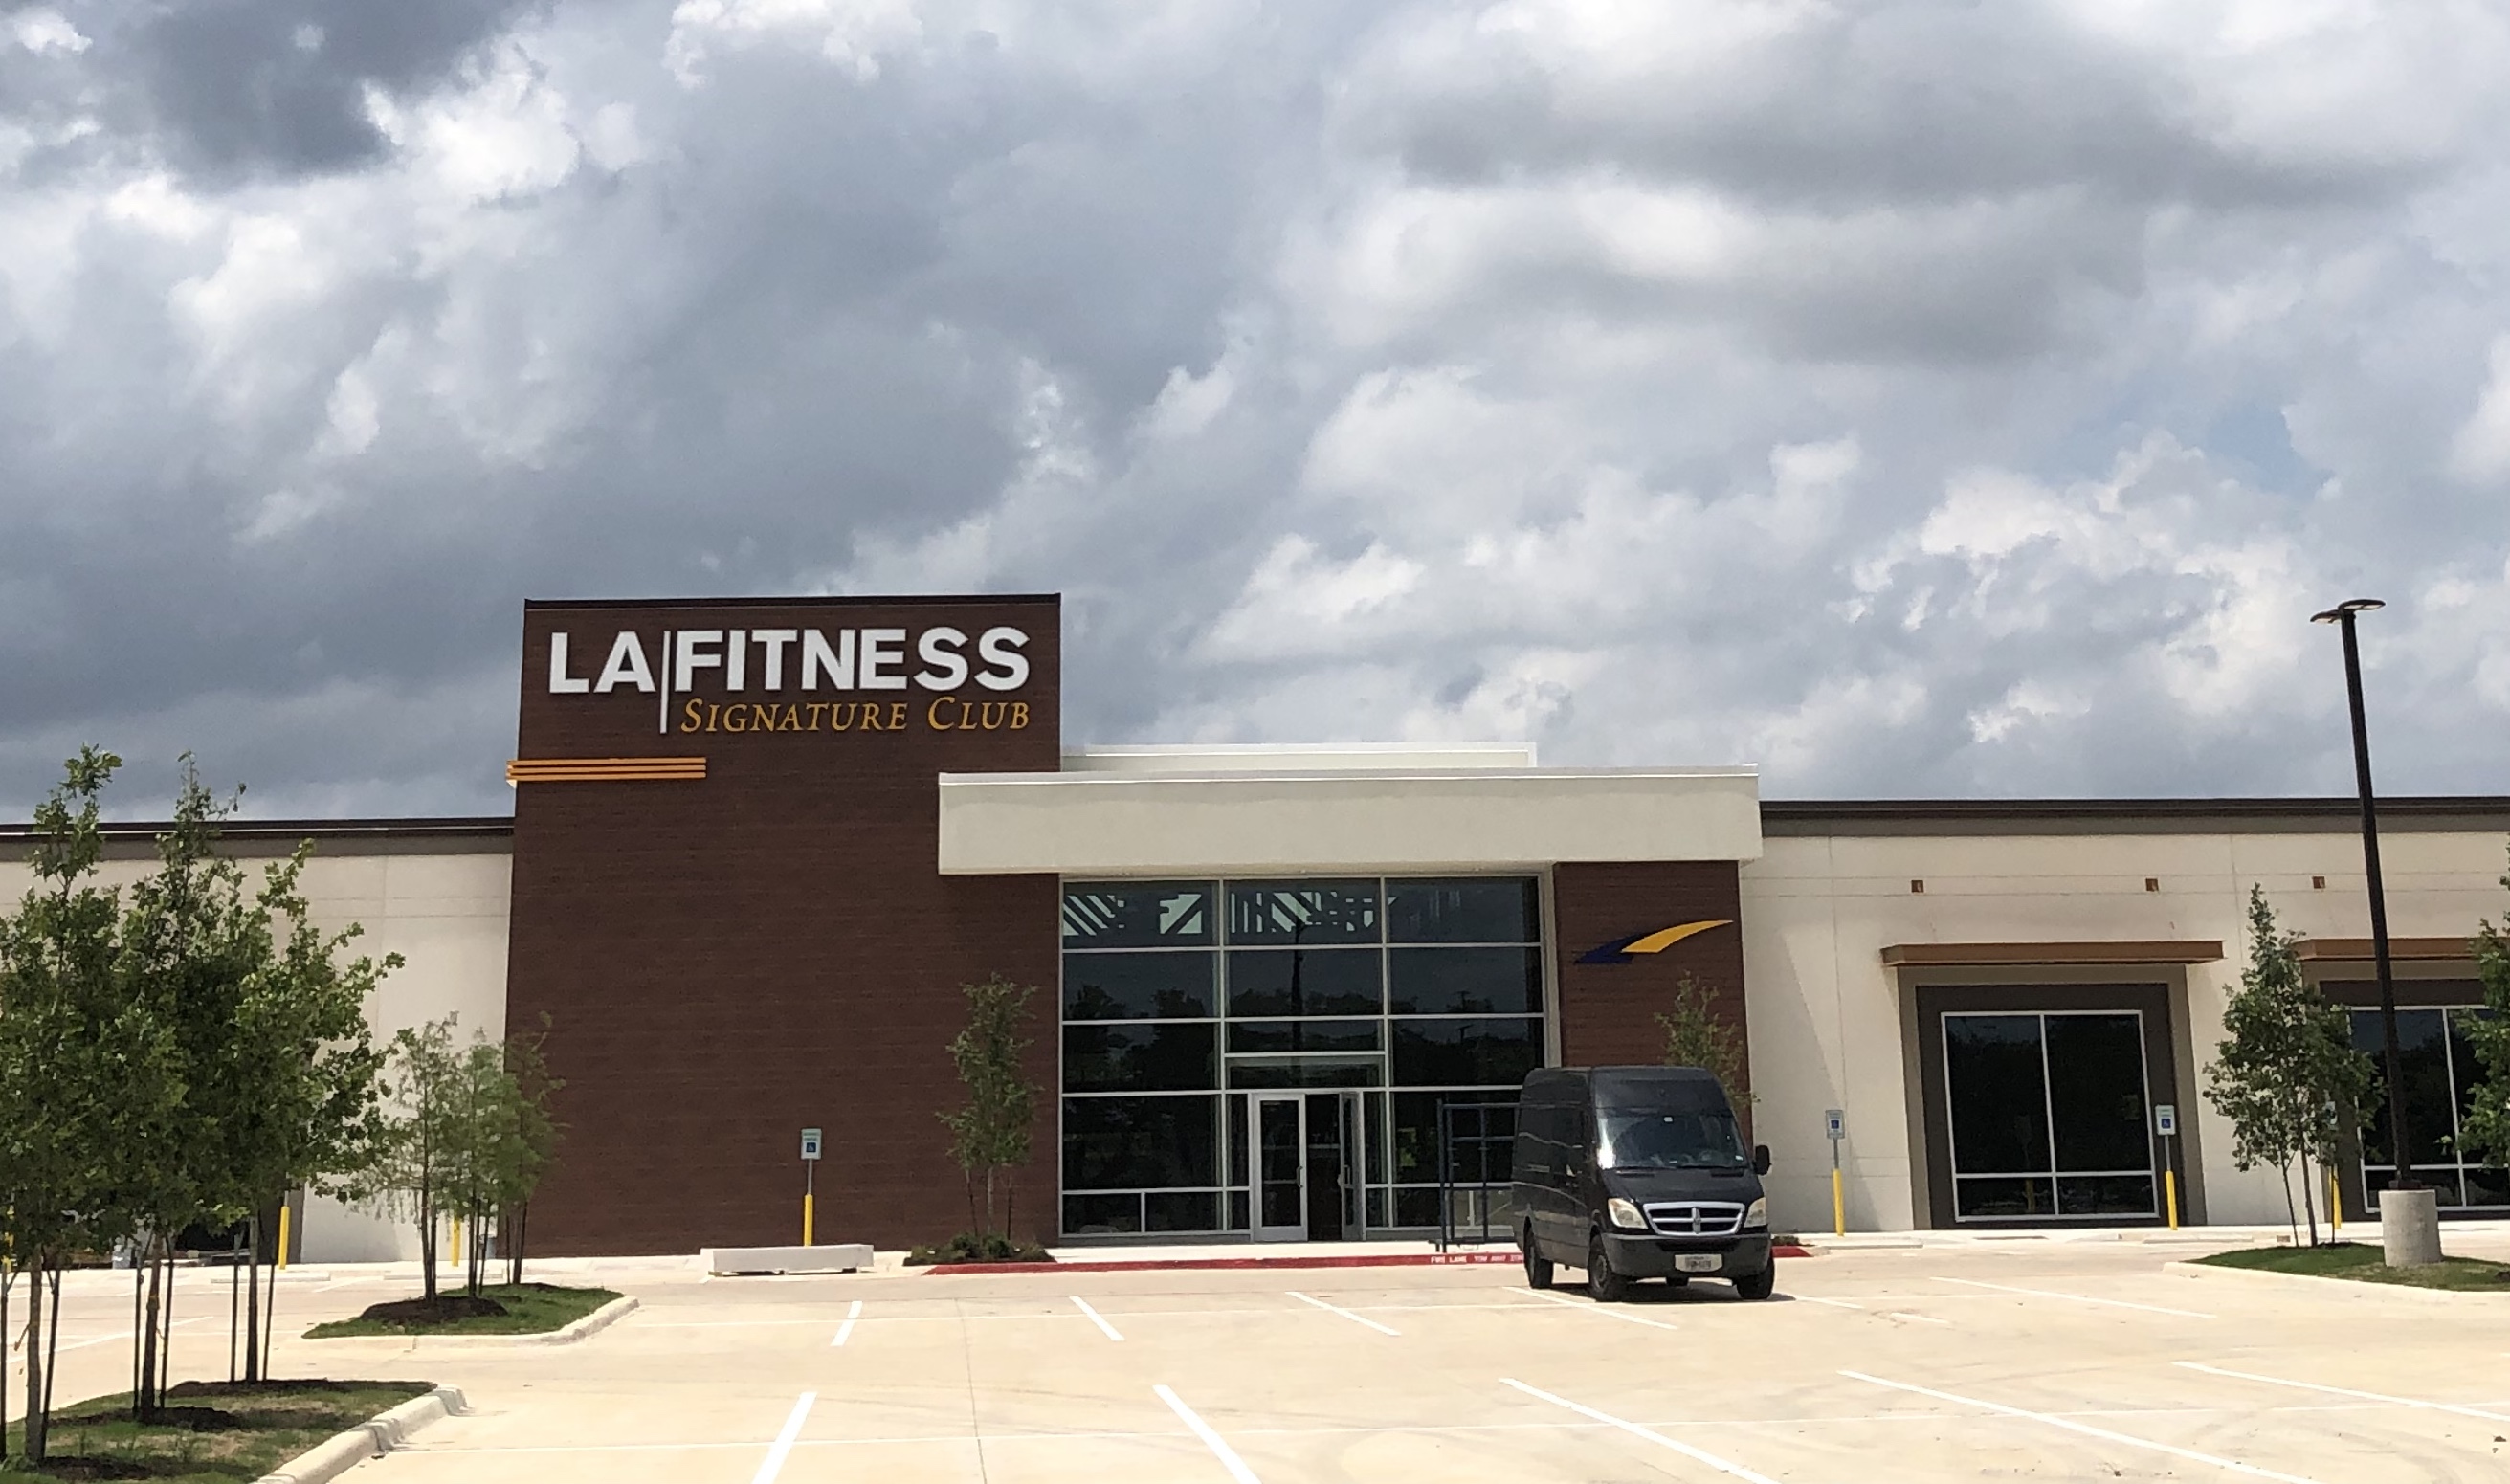 La Fitness Signature Club The Woodlands, TX - Last Updated March